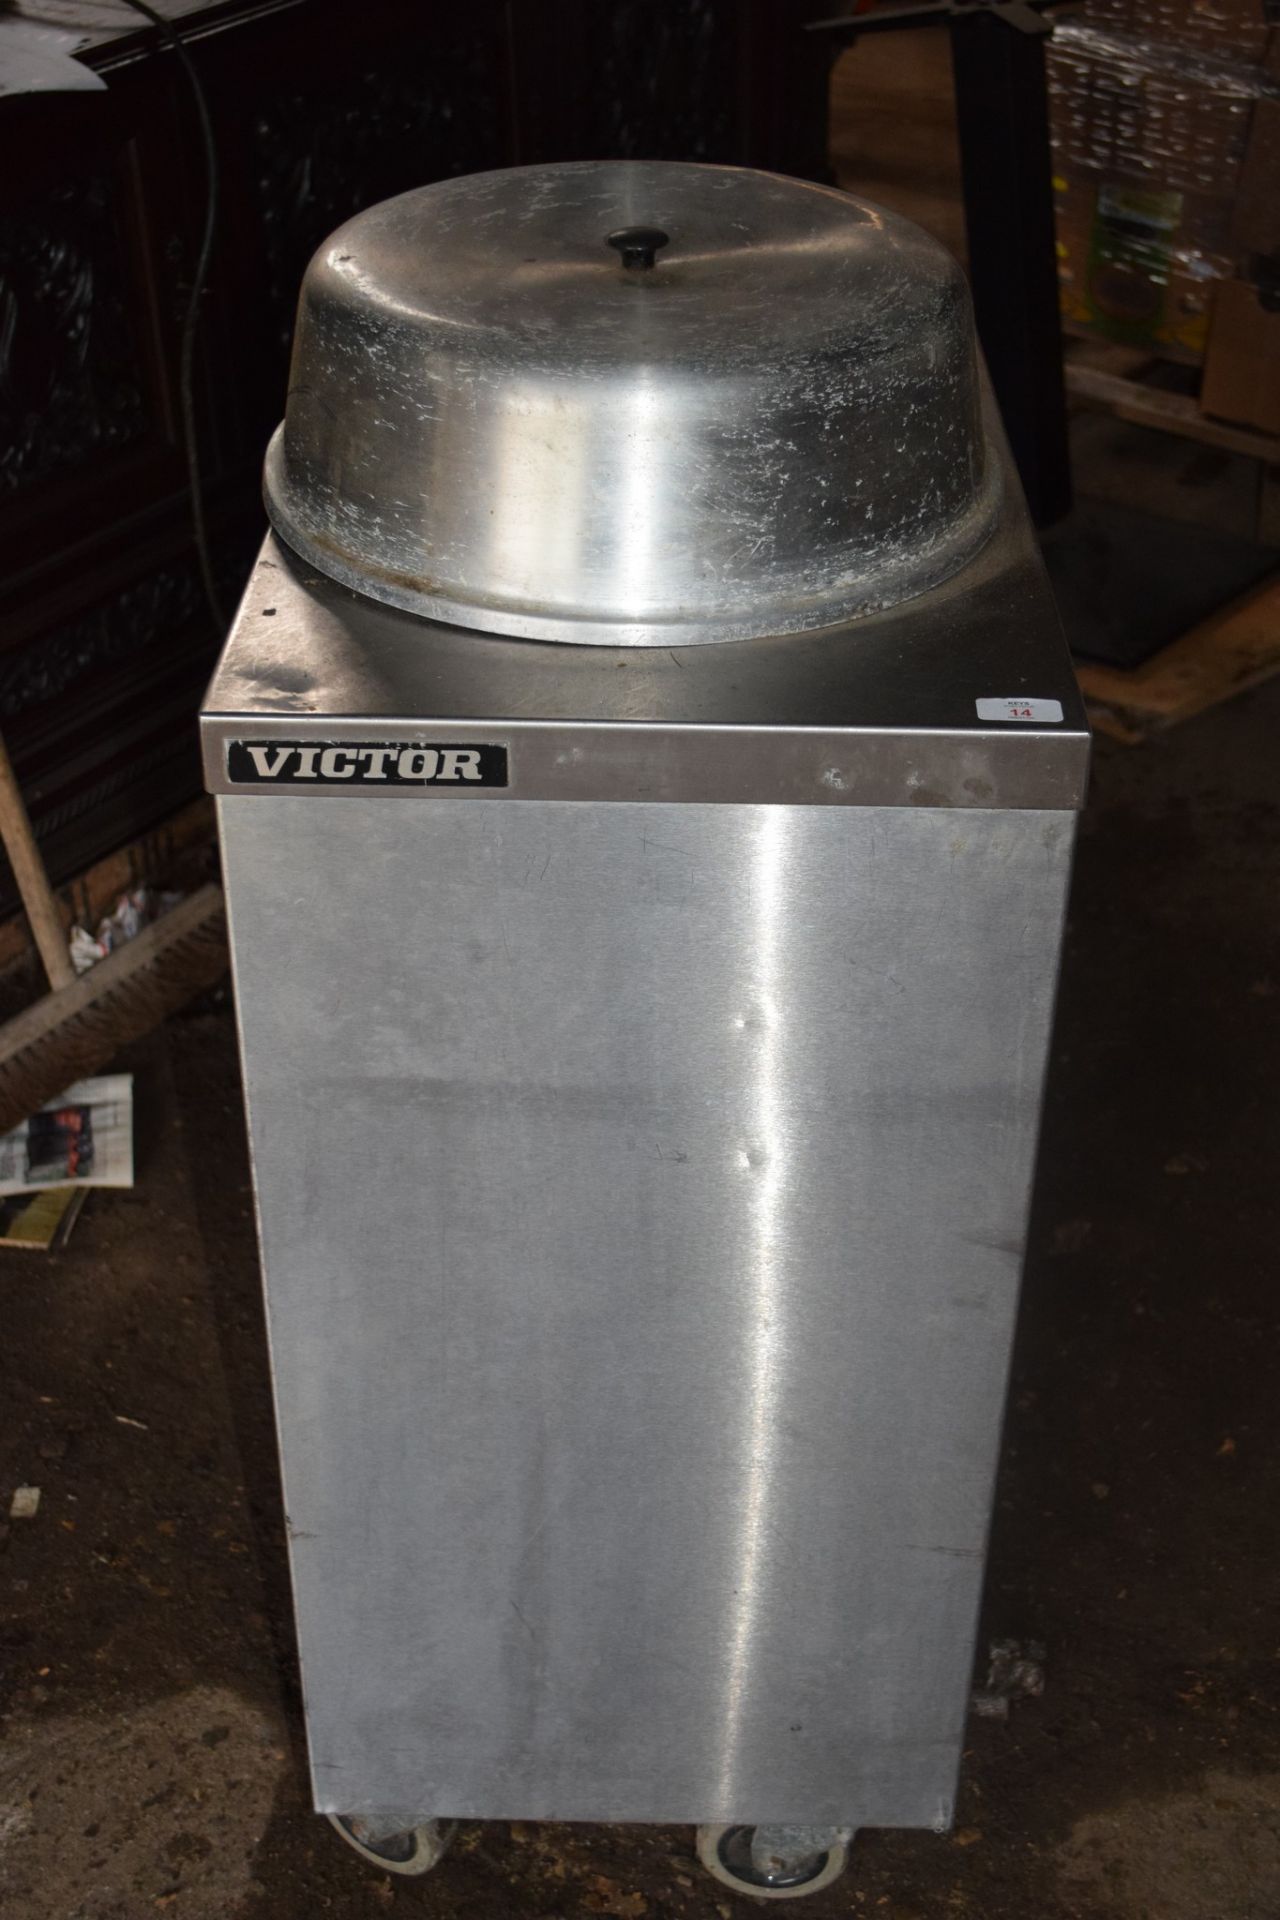 Victor stainless steel Plate Warmer.